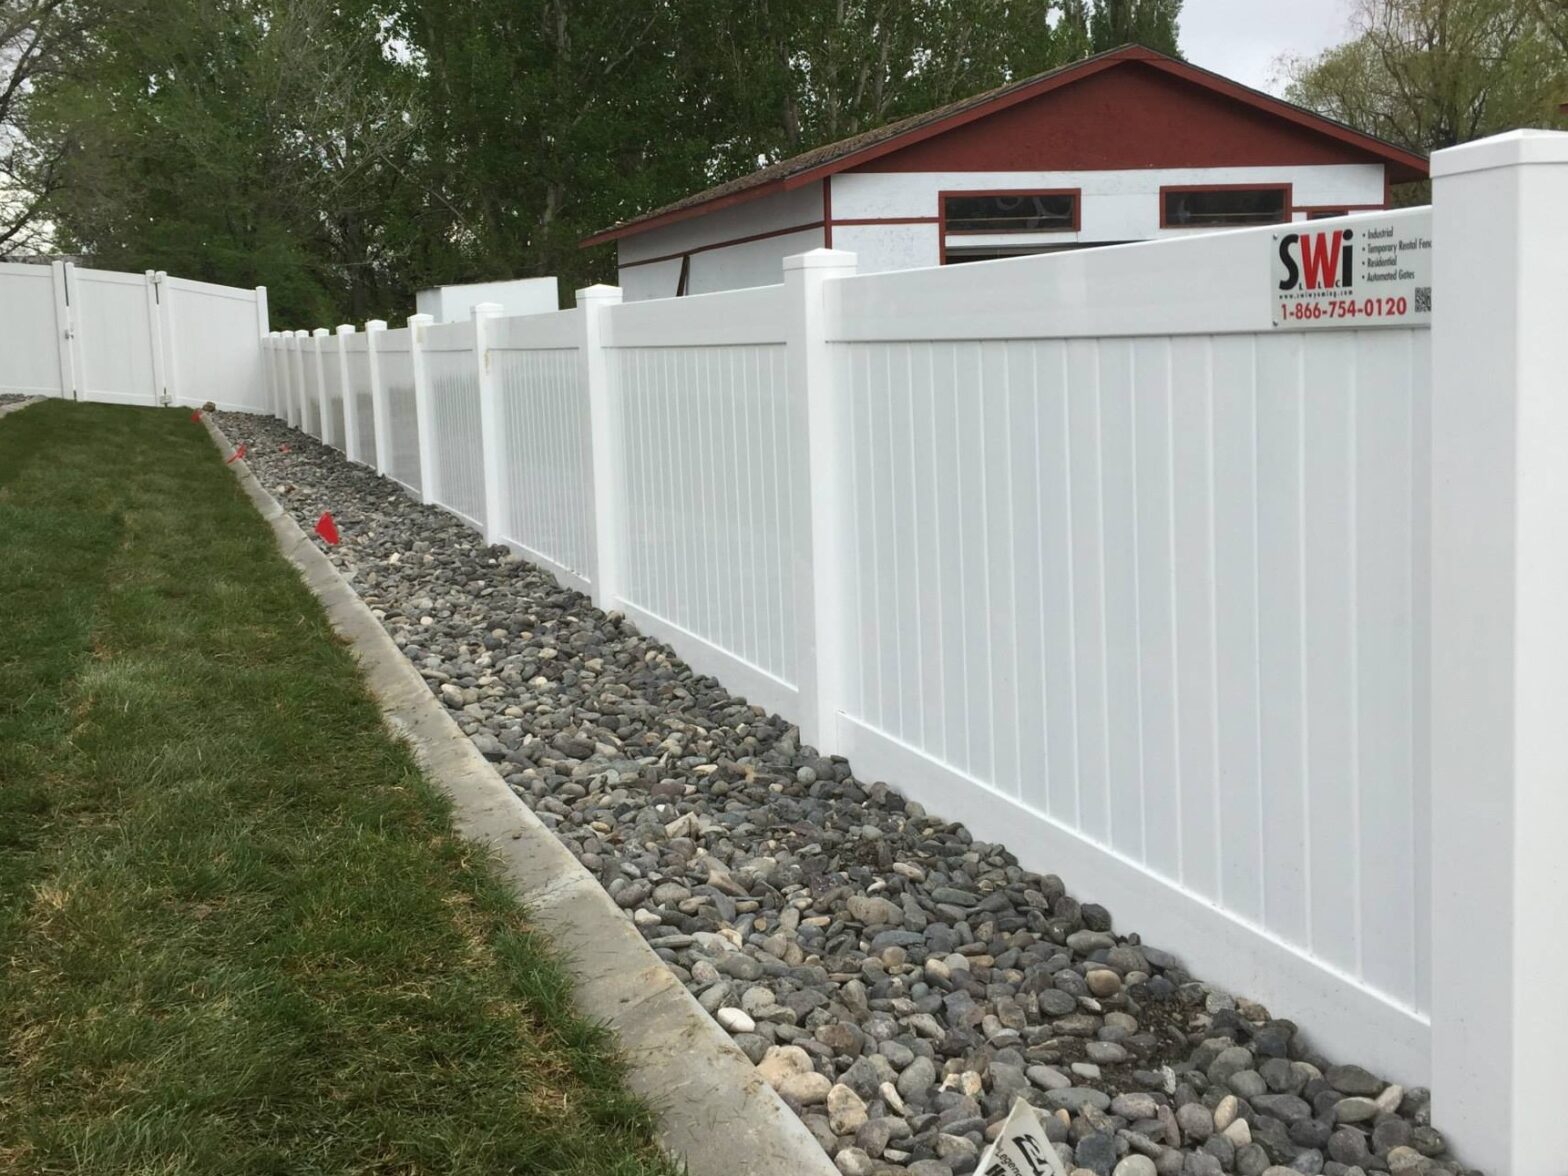 Photo of vinyl fence installed by SWi Fence in Wyoming